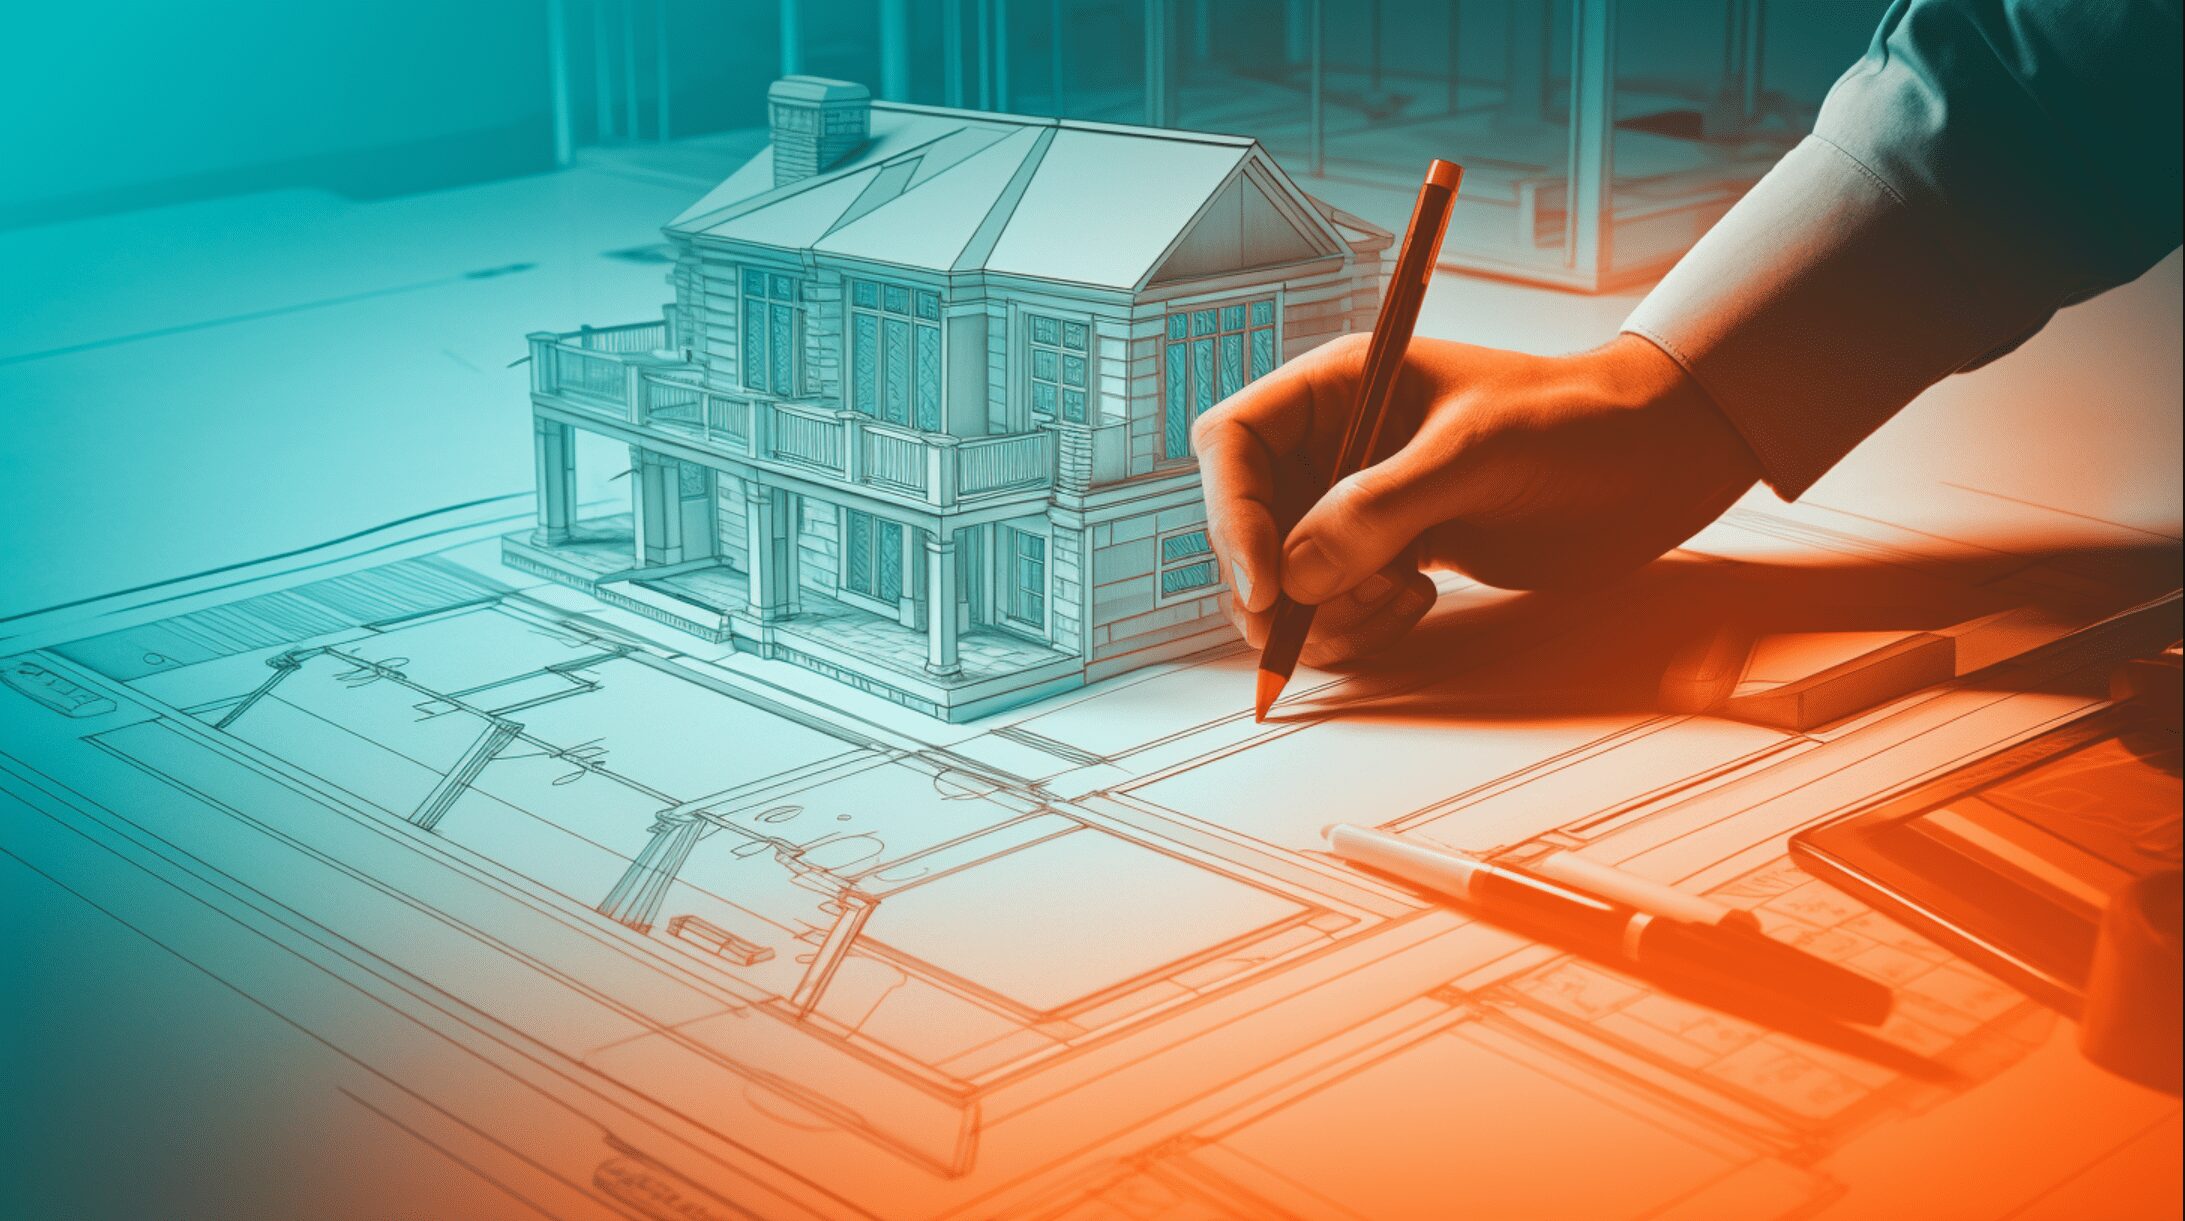 an upclose image of a man's hand drawing a house blueprint which has become 3D